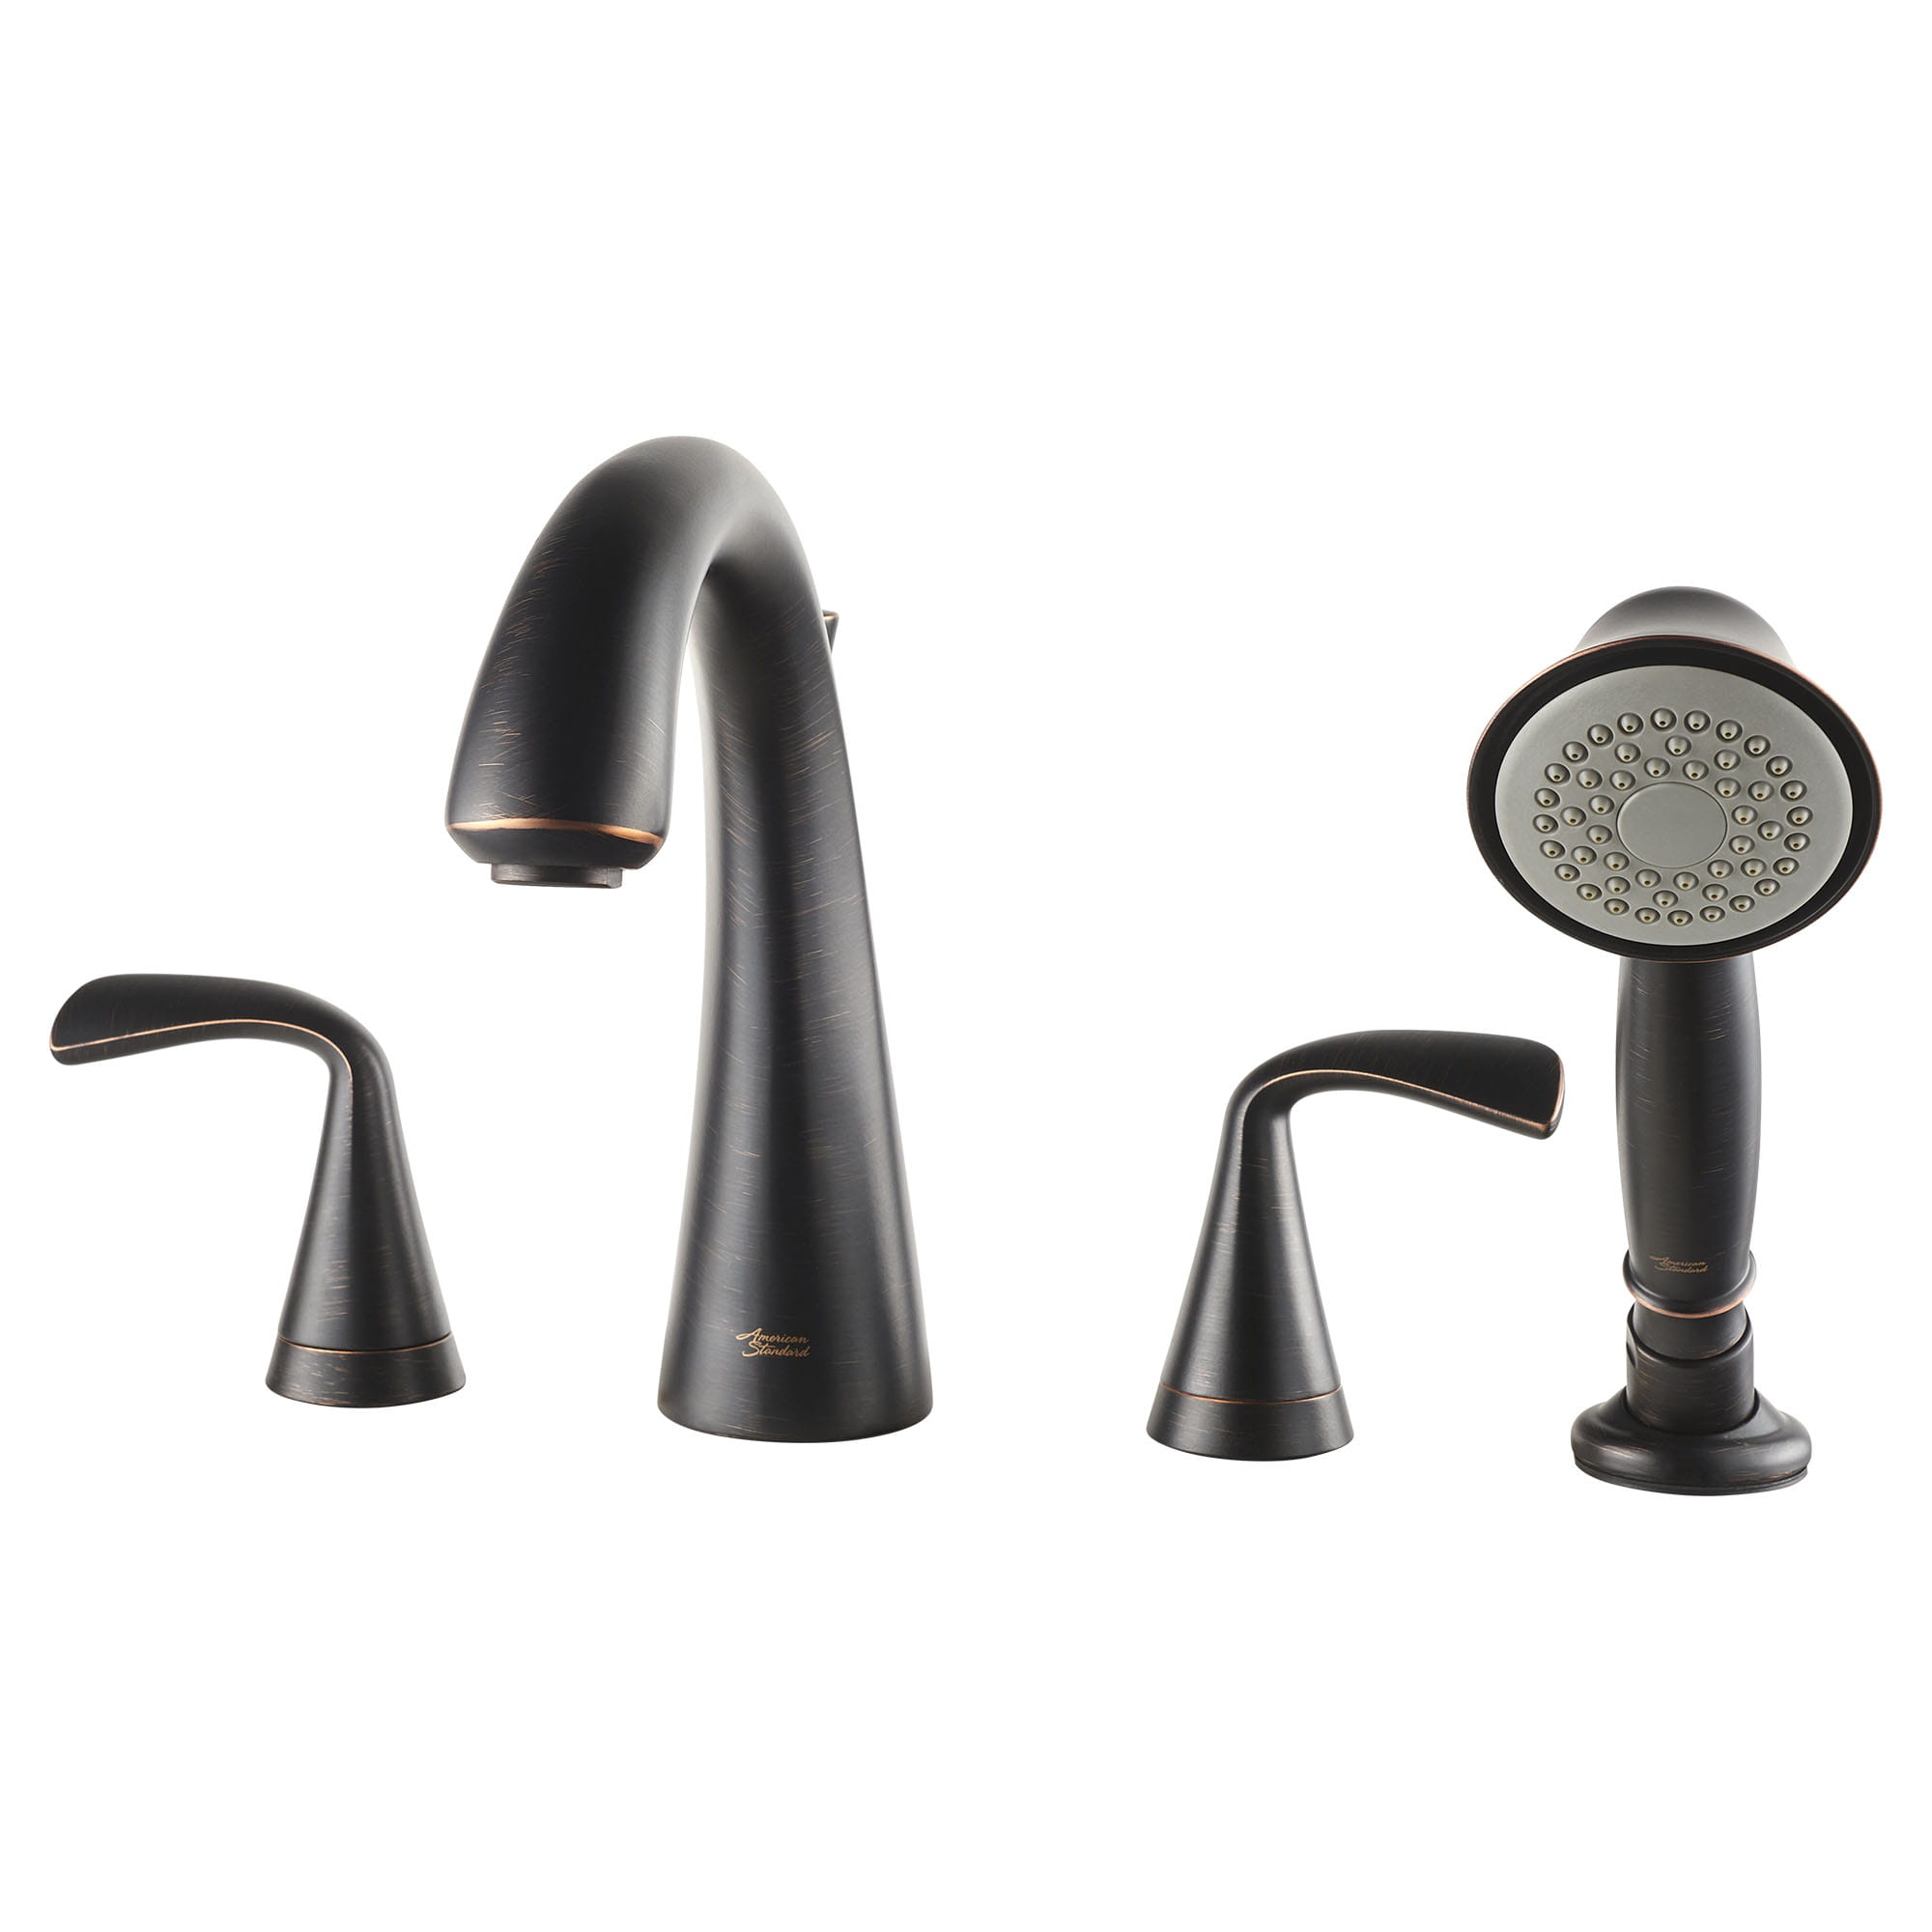 Fluent Bathtub Faucet with Personal Shower for Flash Rough-in Valve with Lever Handles